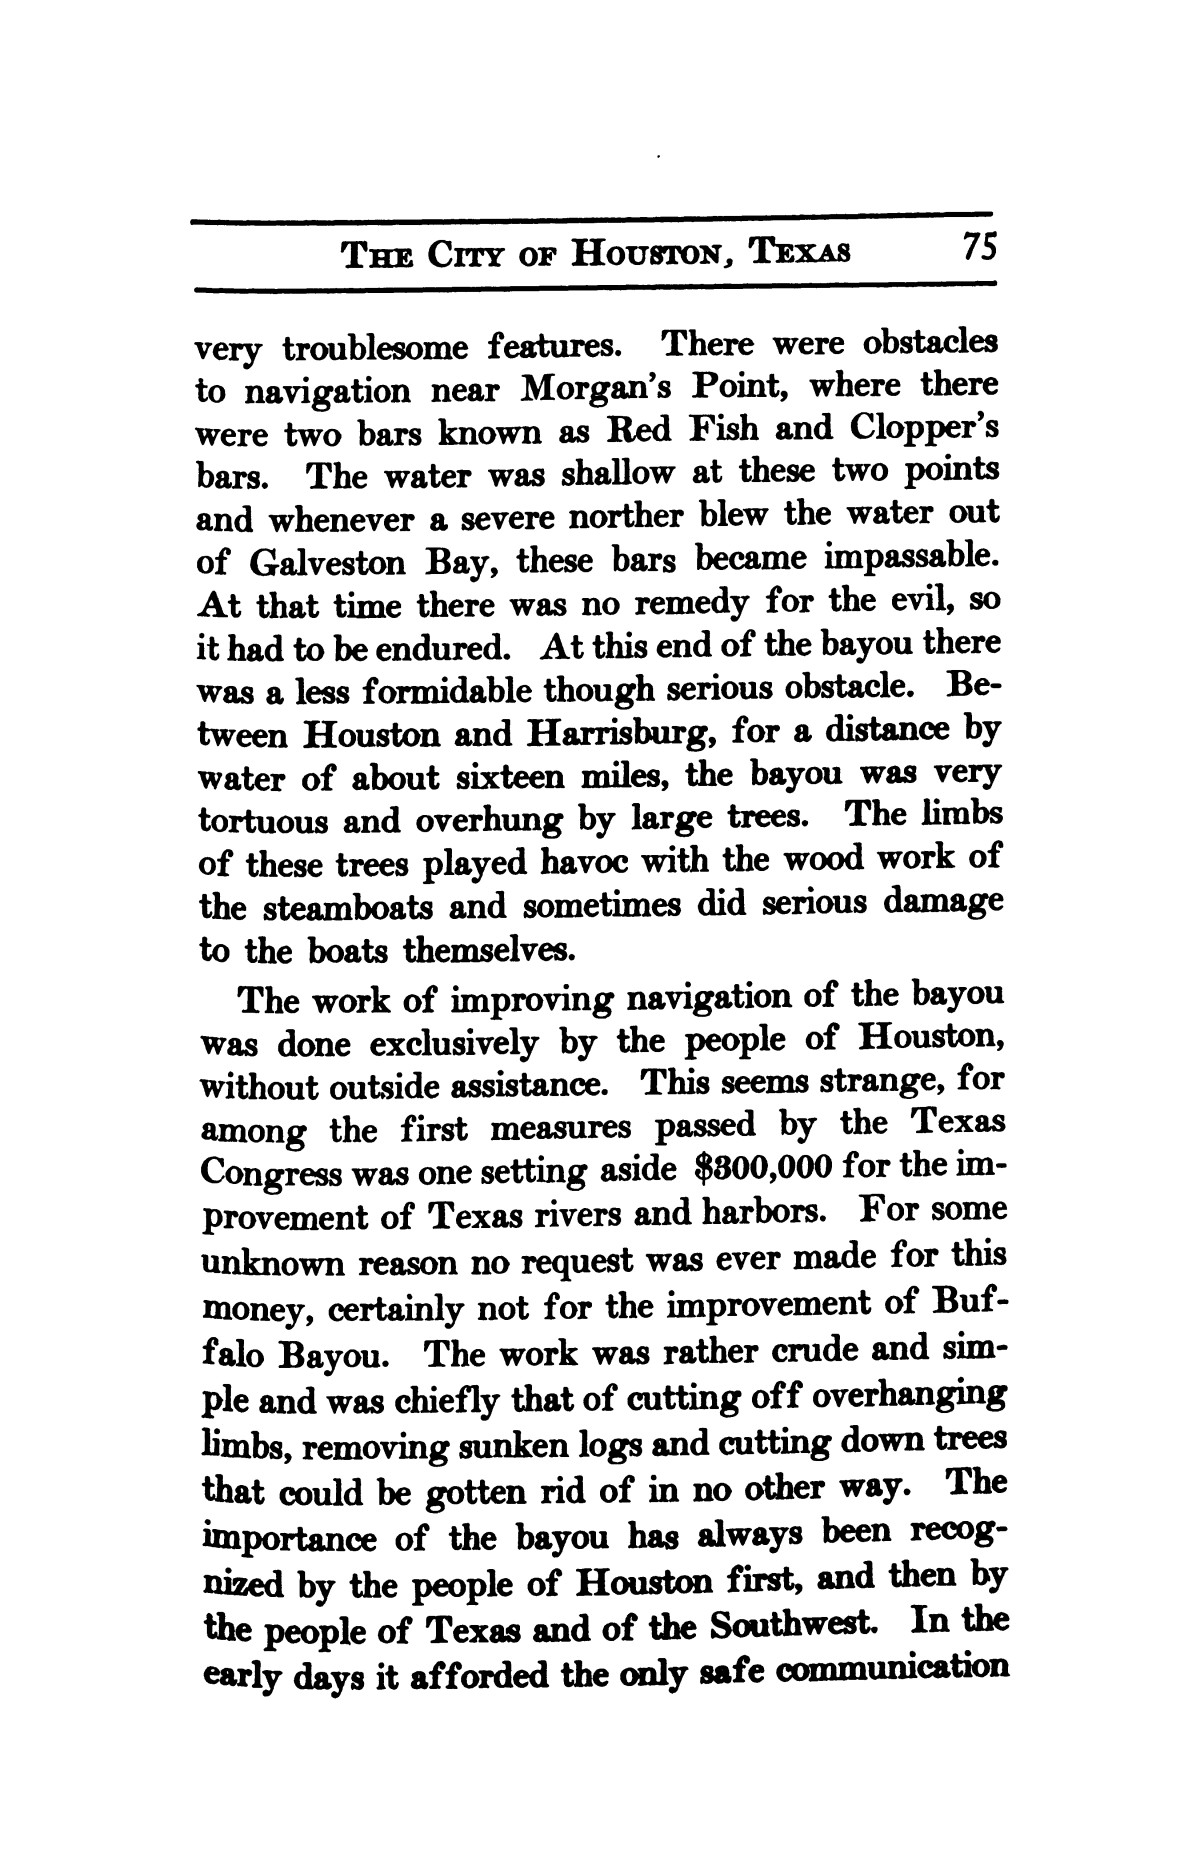 A thumb-nail history of the city of Houston, Texas, from its founding in 1836 to the year 1912
                                                
                                                    75
                                                